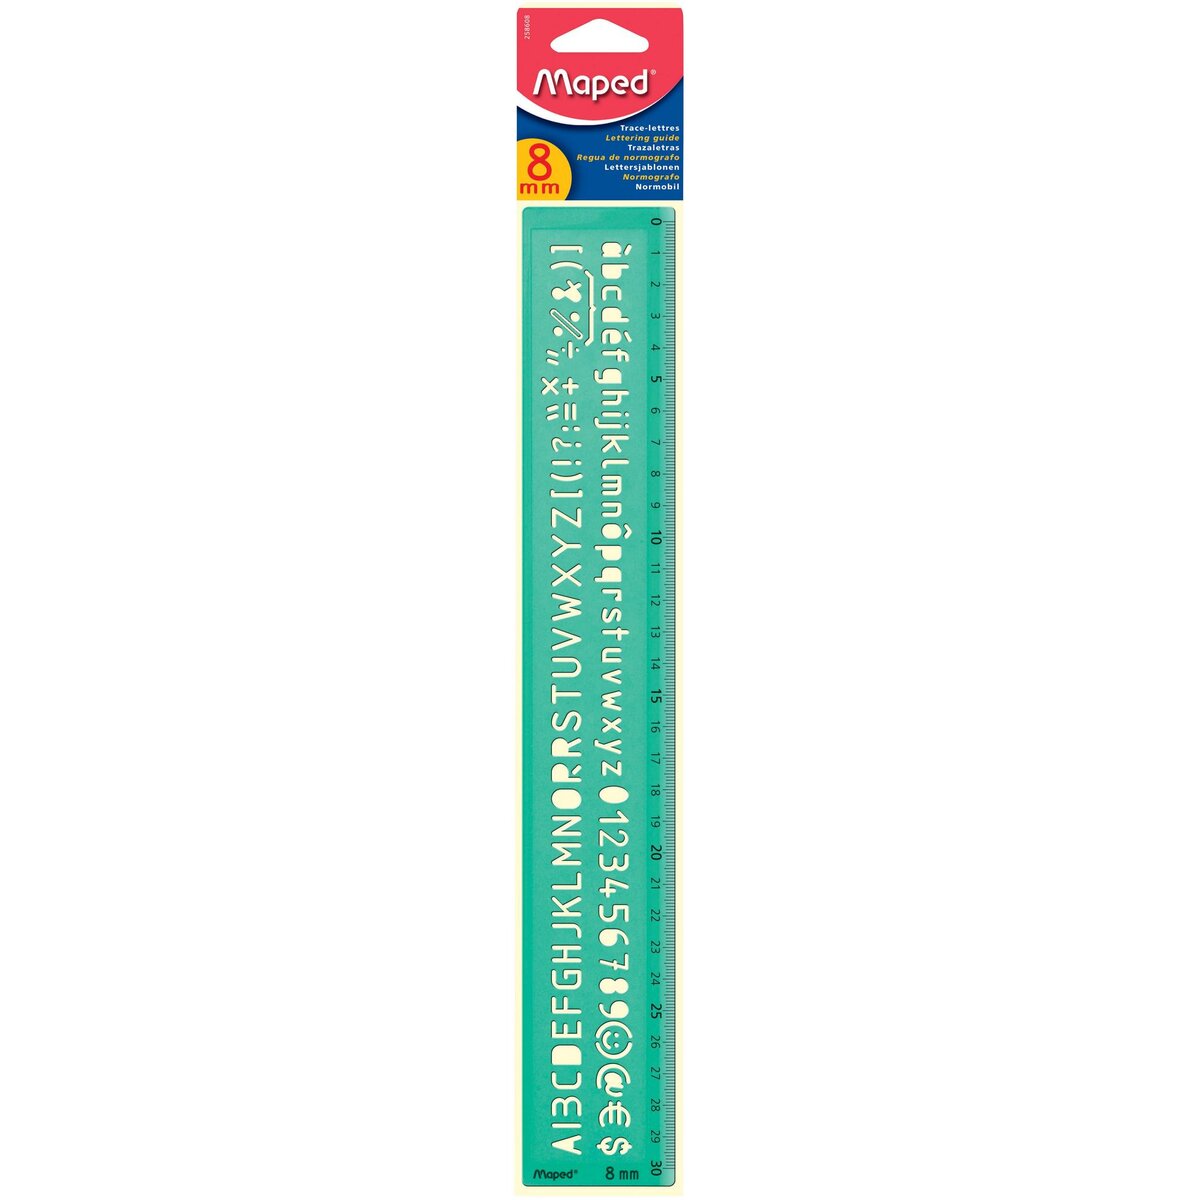 MAPED Trace-lettres souple 8mm - vert